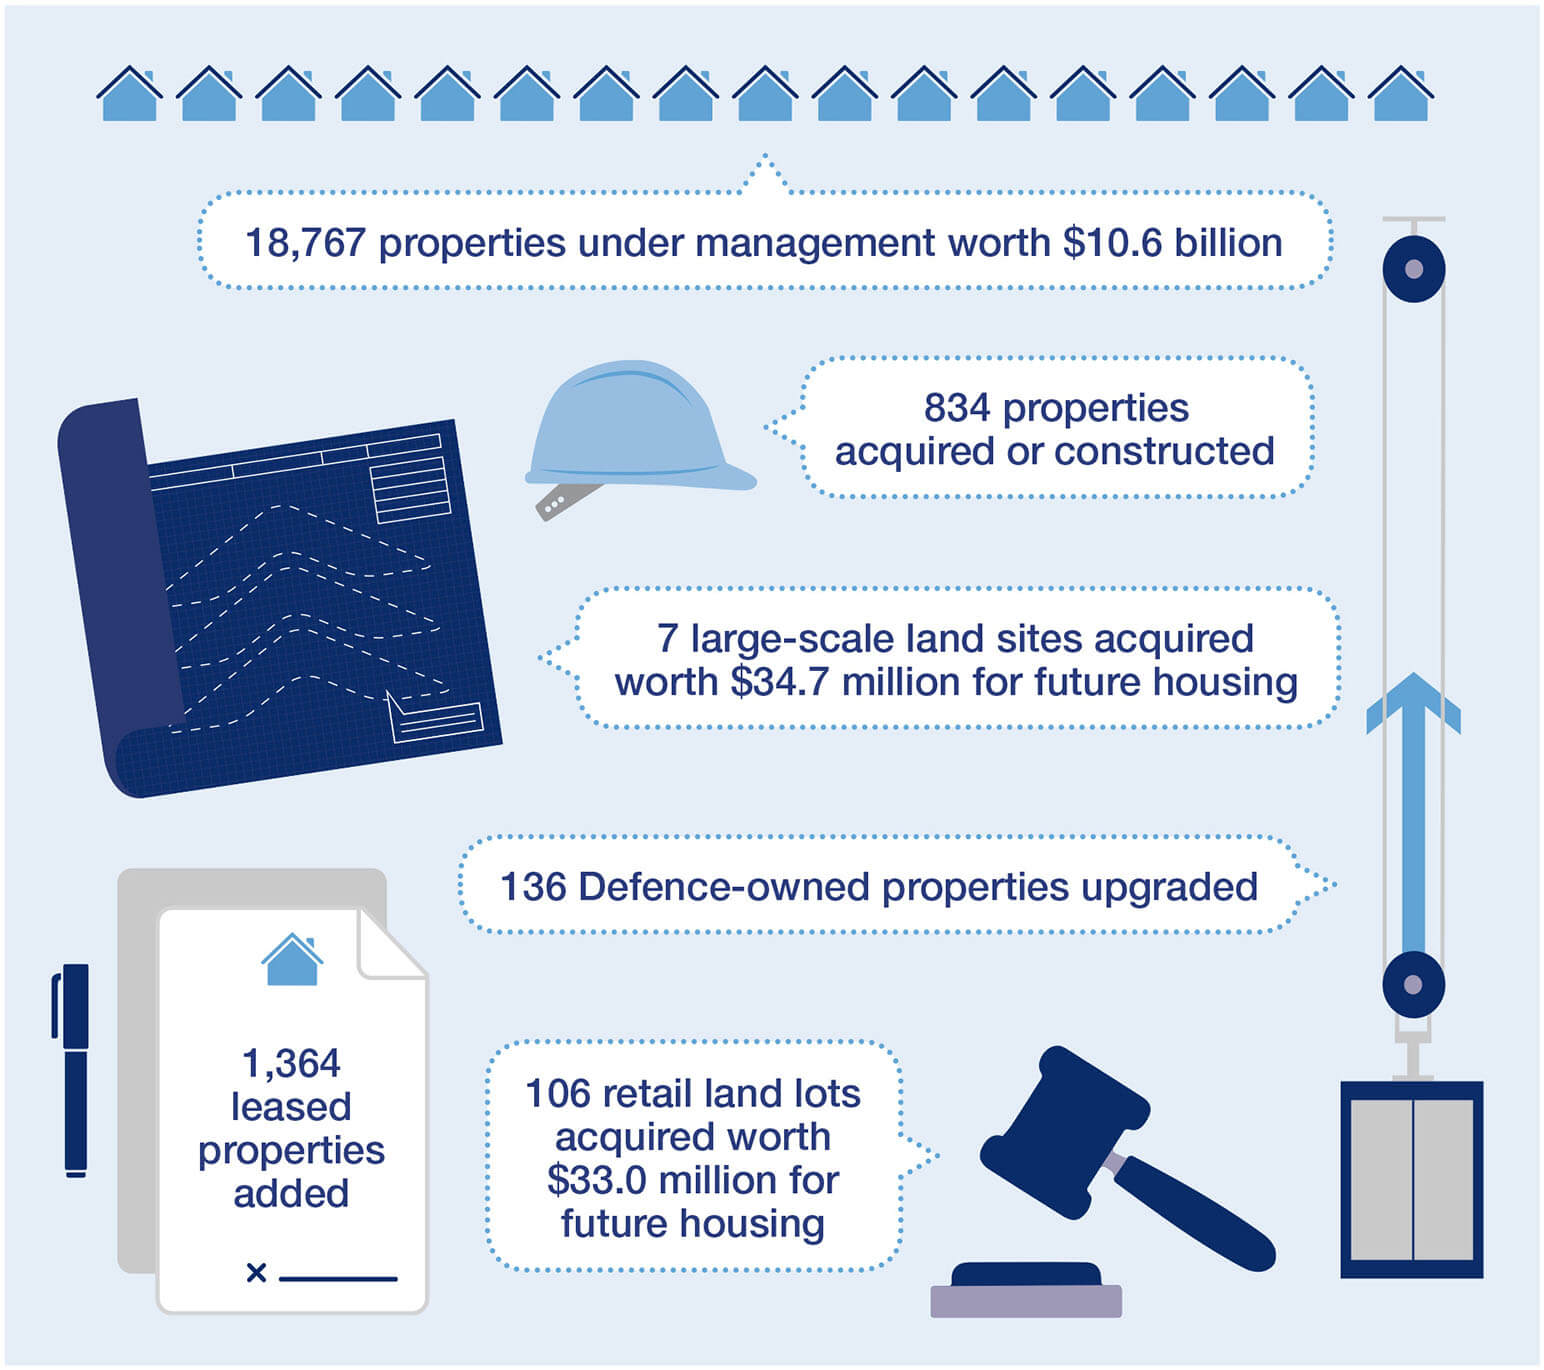 18,767 properties under management worth $10.6 billion. 834 properties acquired or constructed. 7 large-scale land sites acquired worth $34.7 million for future housing. 136 Defence-owned properties upgraded. 1,364 leased properties added. 106 retail land lots acquired worth $33.0 million for future housing.